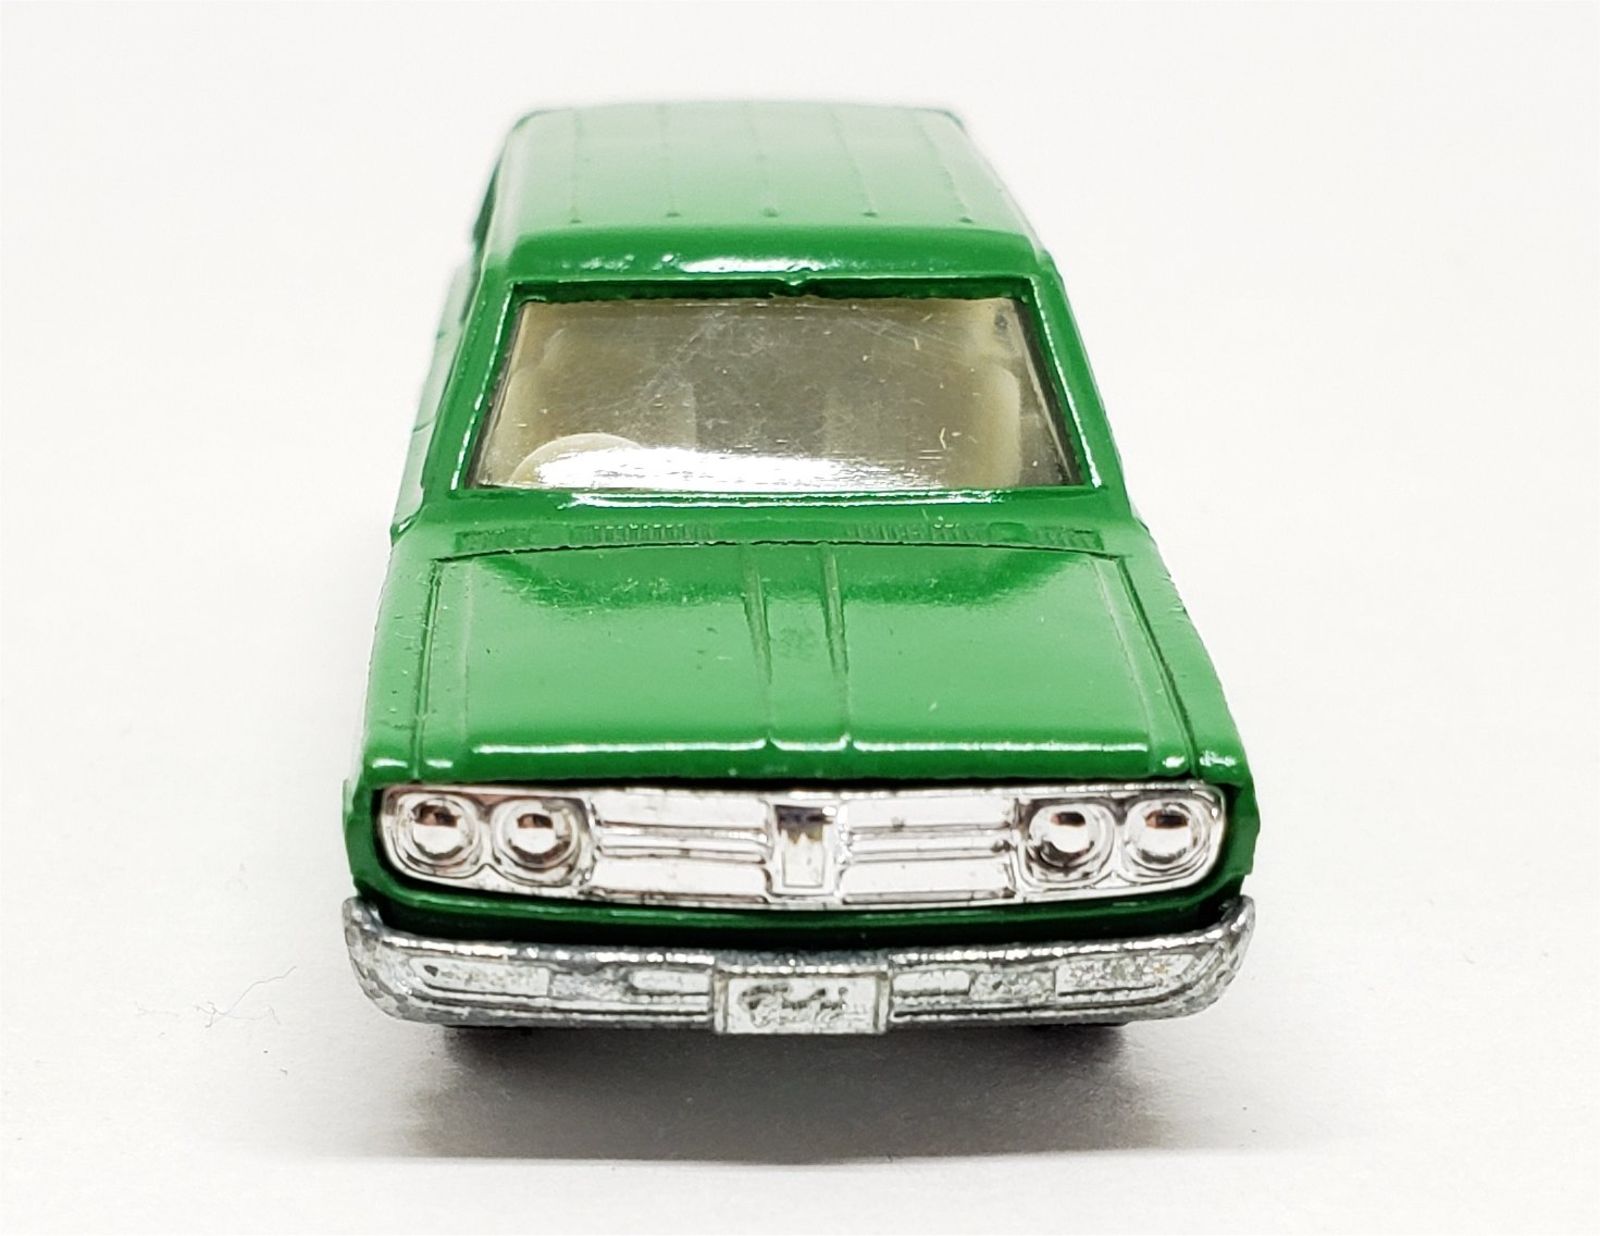 Illustration for article titled [REVIEW] Tomica Nissan Cedric Wagon